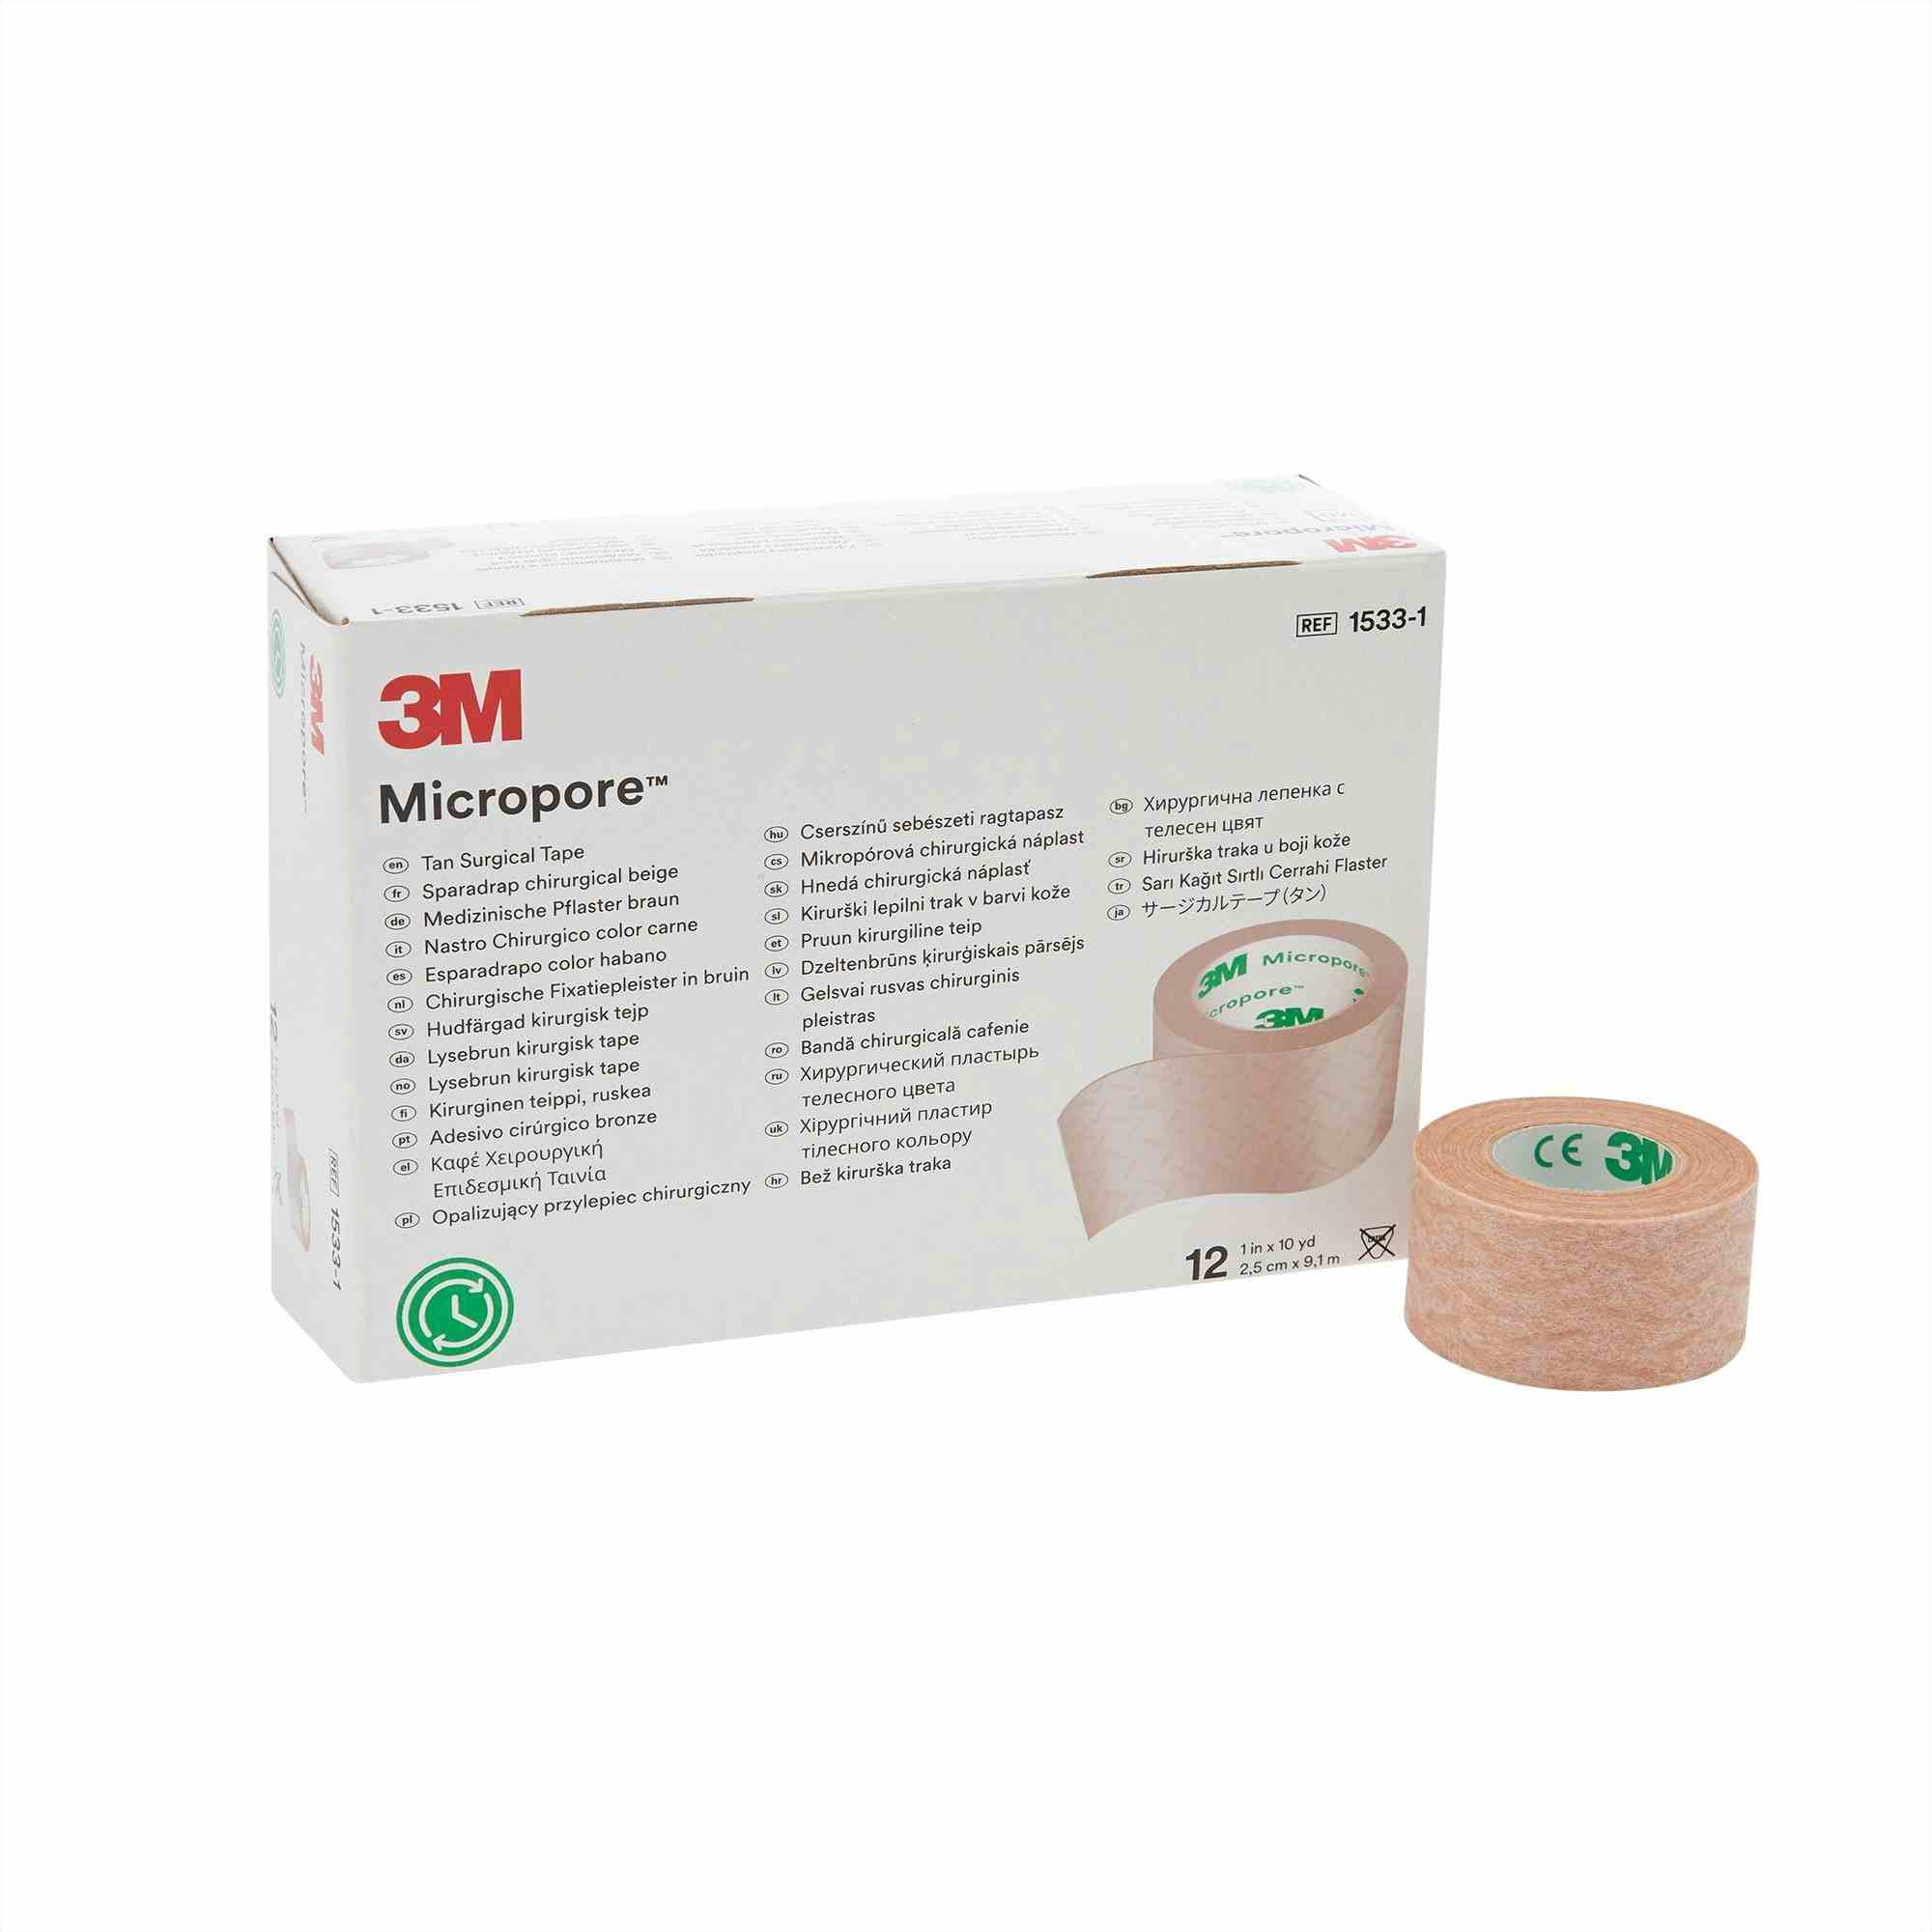 3M Micropore Tan Surgical Tape, 1" X 10 yd, 1533-1, Box of 12